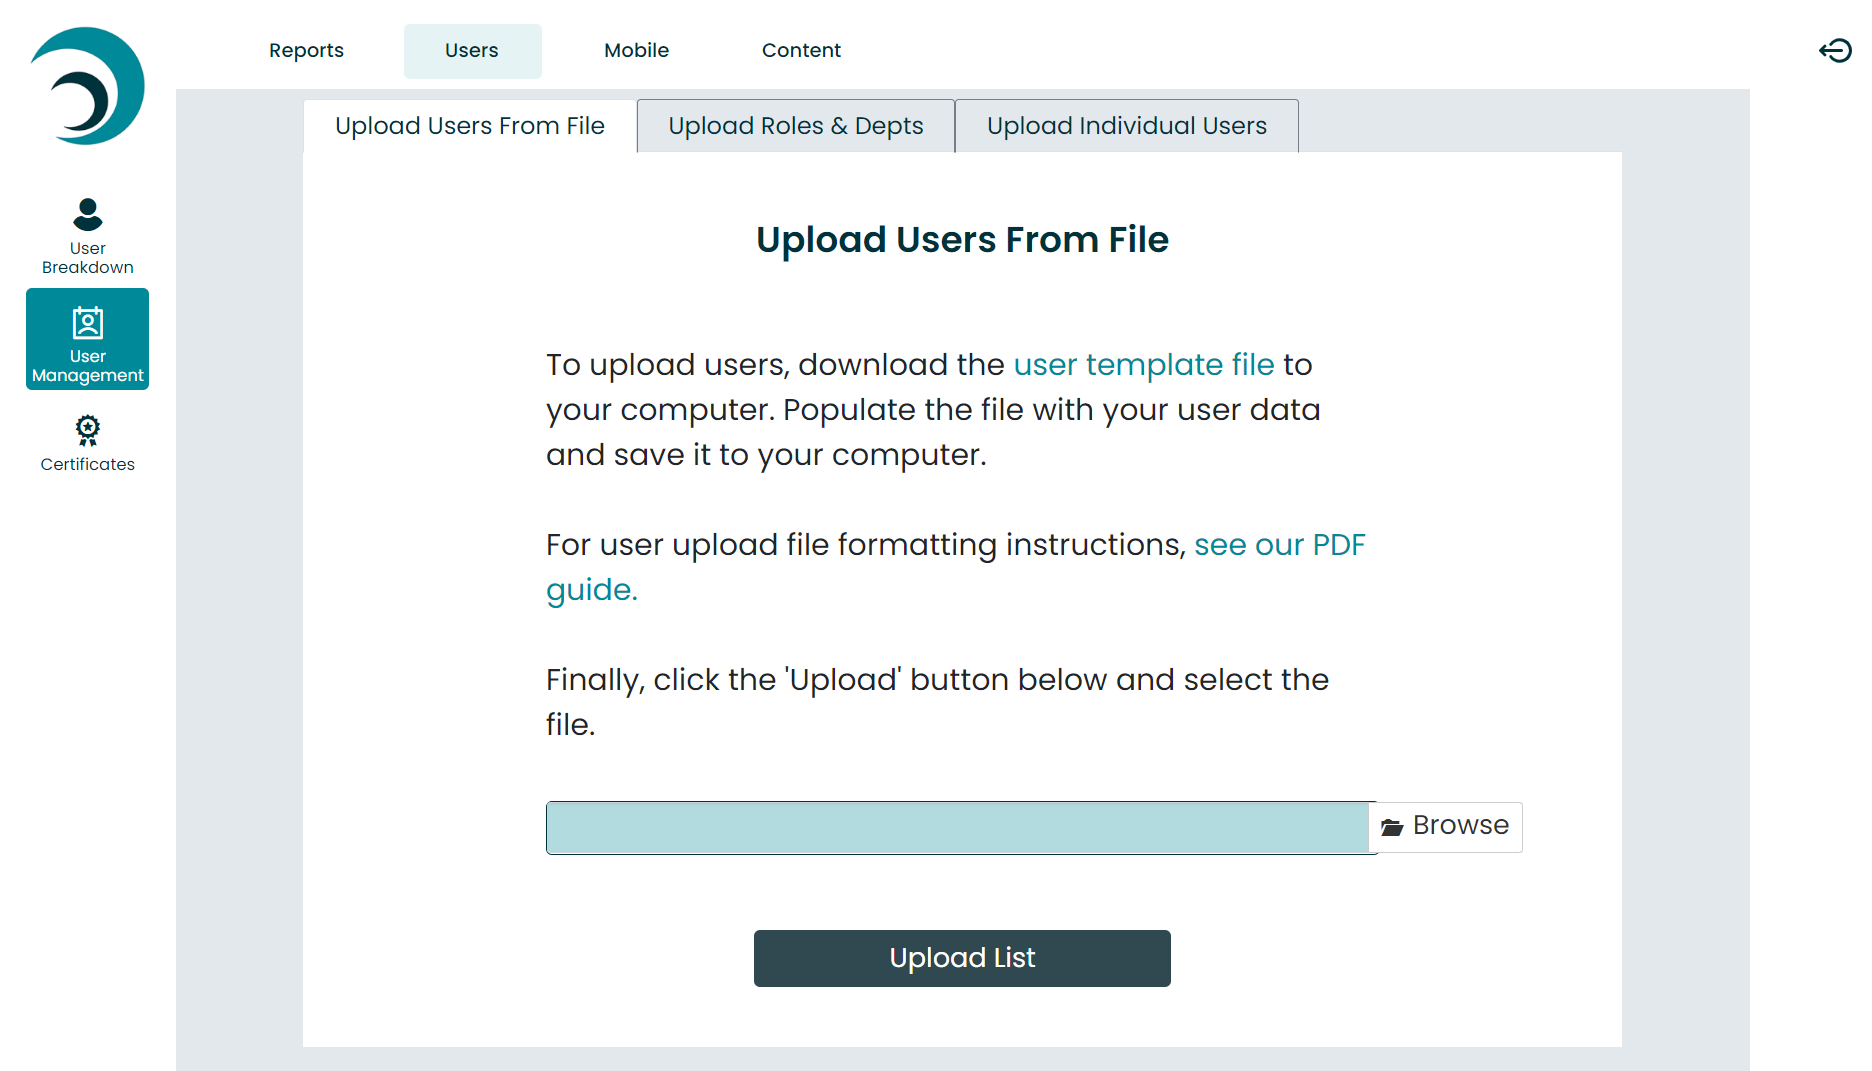 Upload users from file